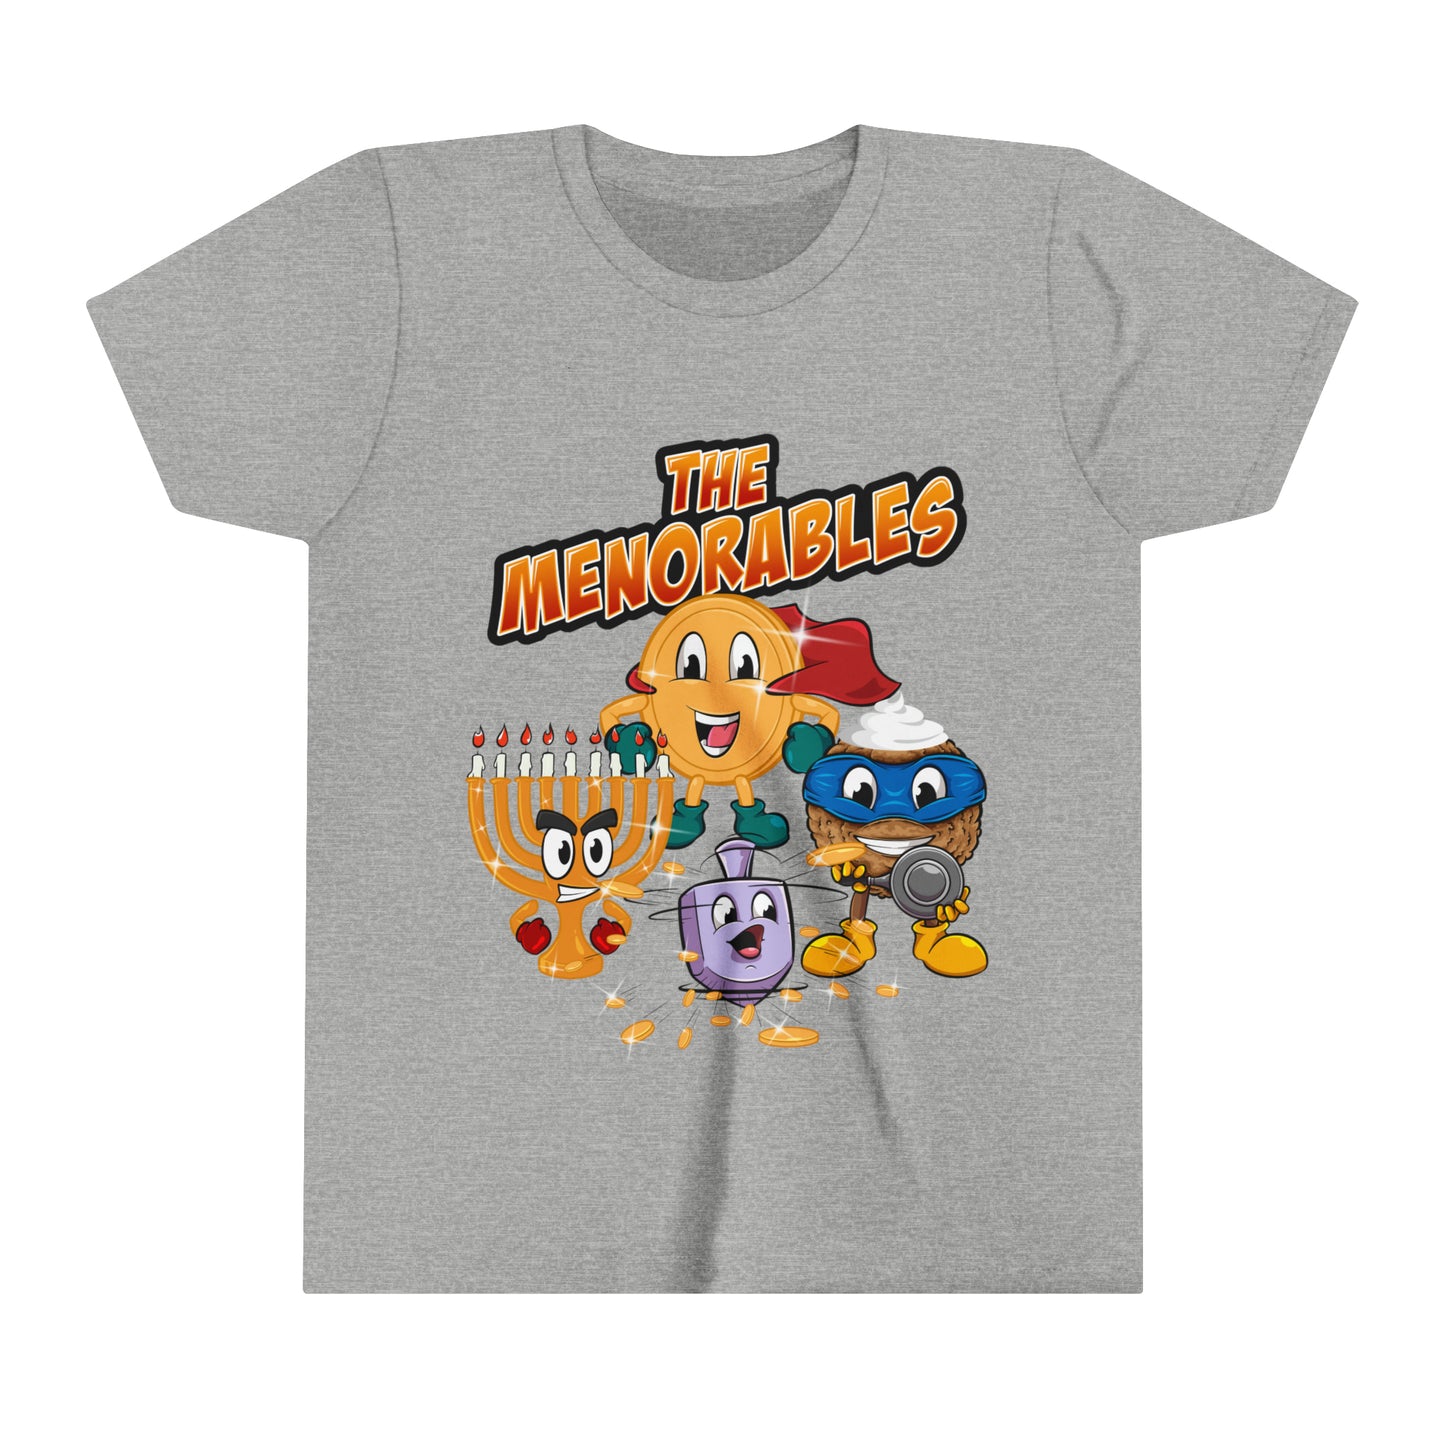 The Menorables Youth Tee